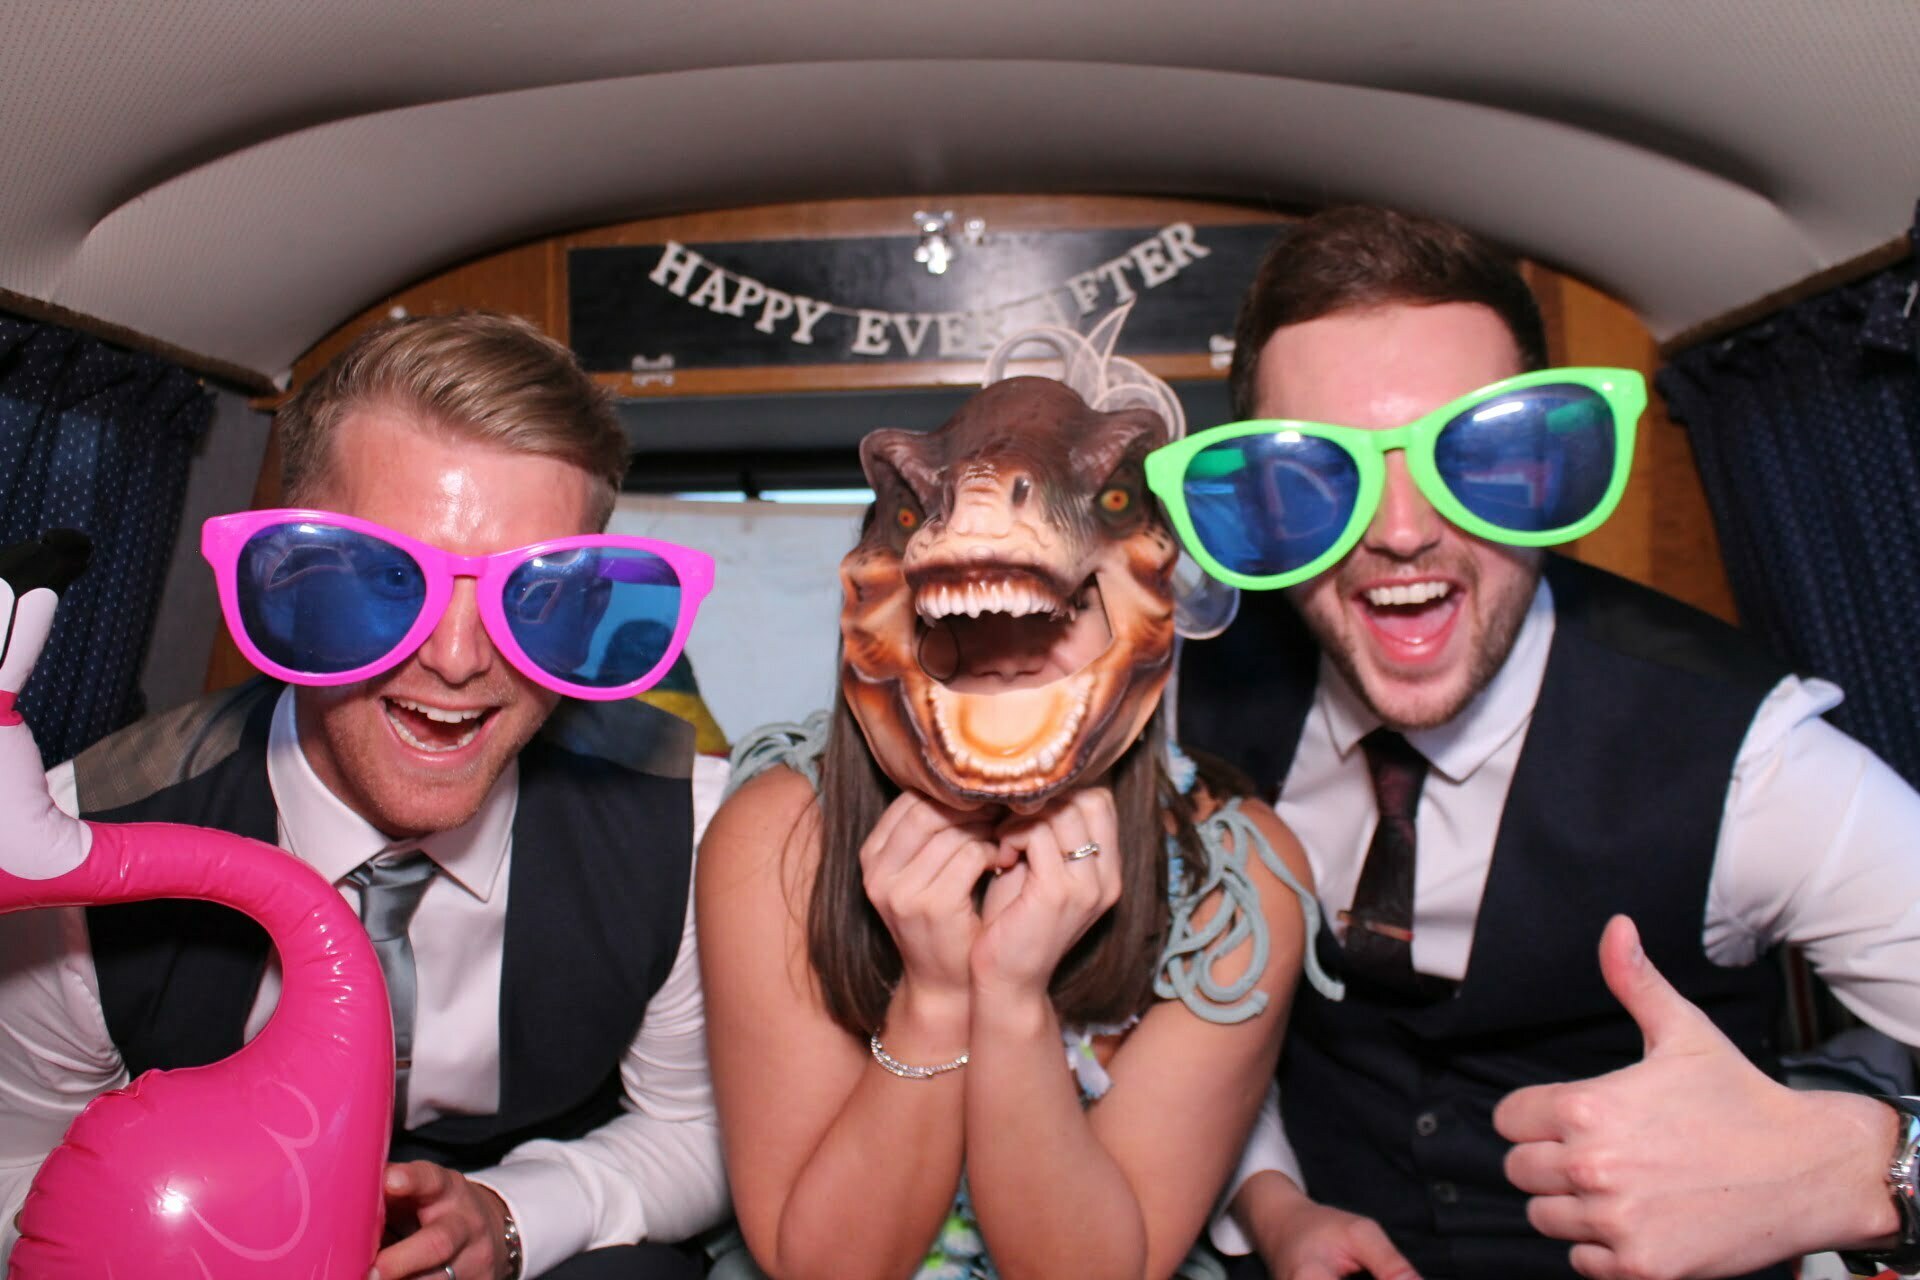 Wedding guests having fun in the vw photo booth